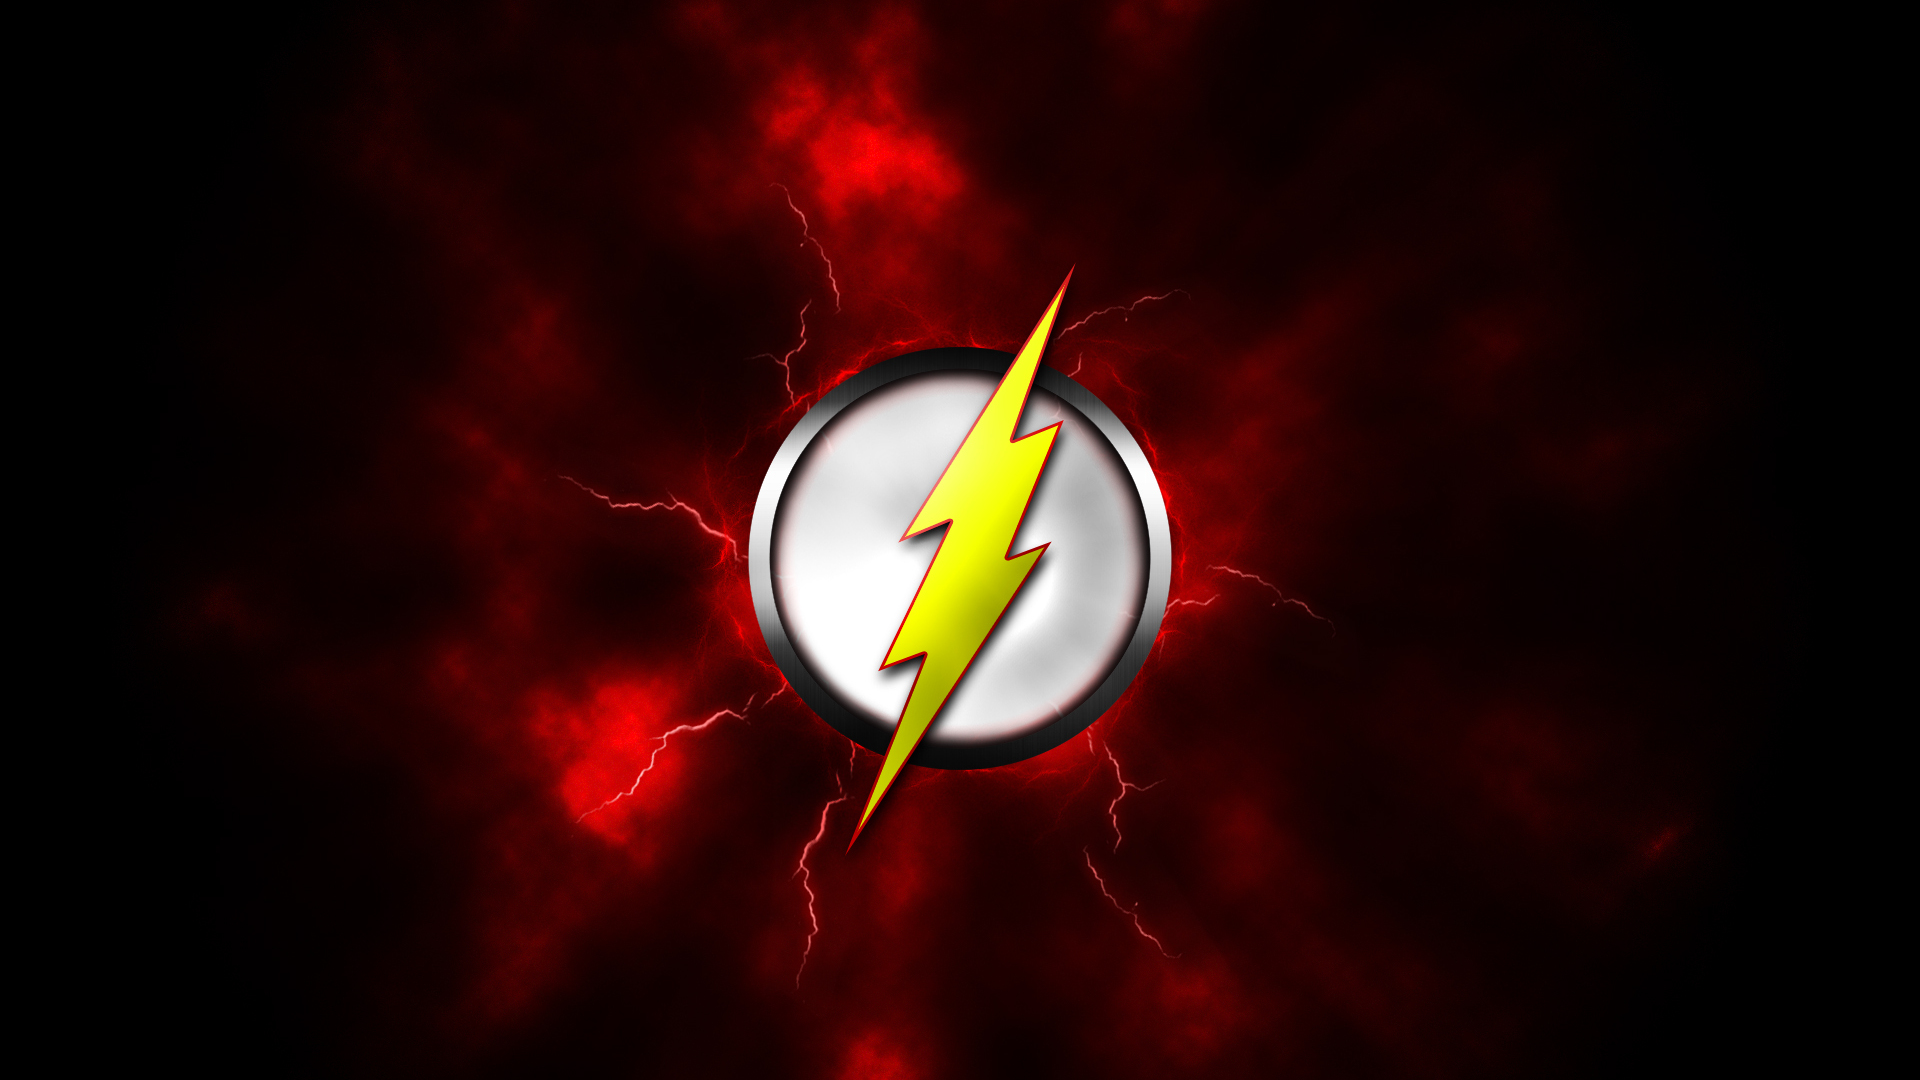 Wallpapers The Flash Symbol Logos 1920x1080 | #808556 #the flash ...